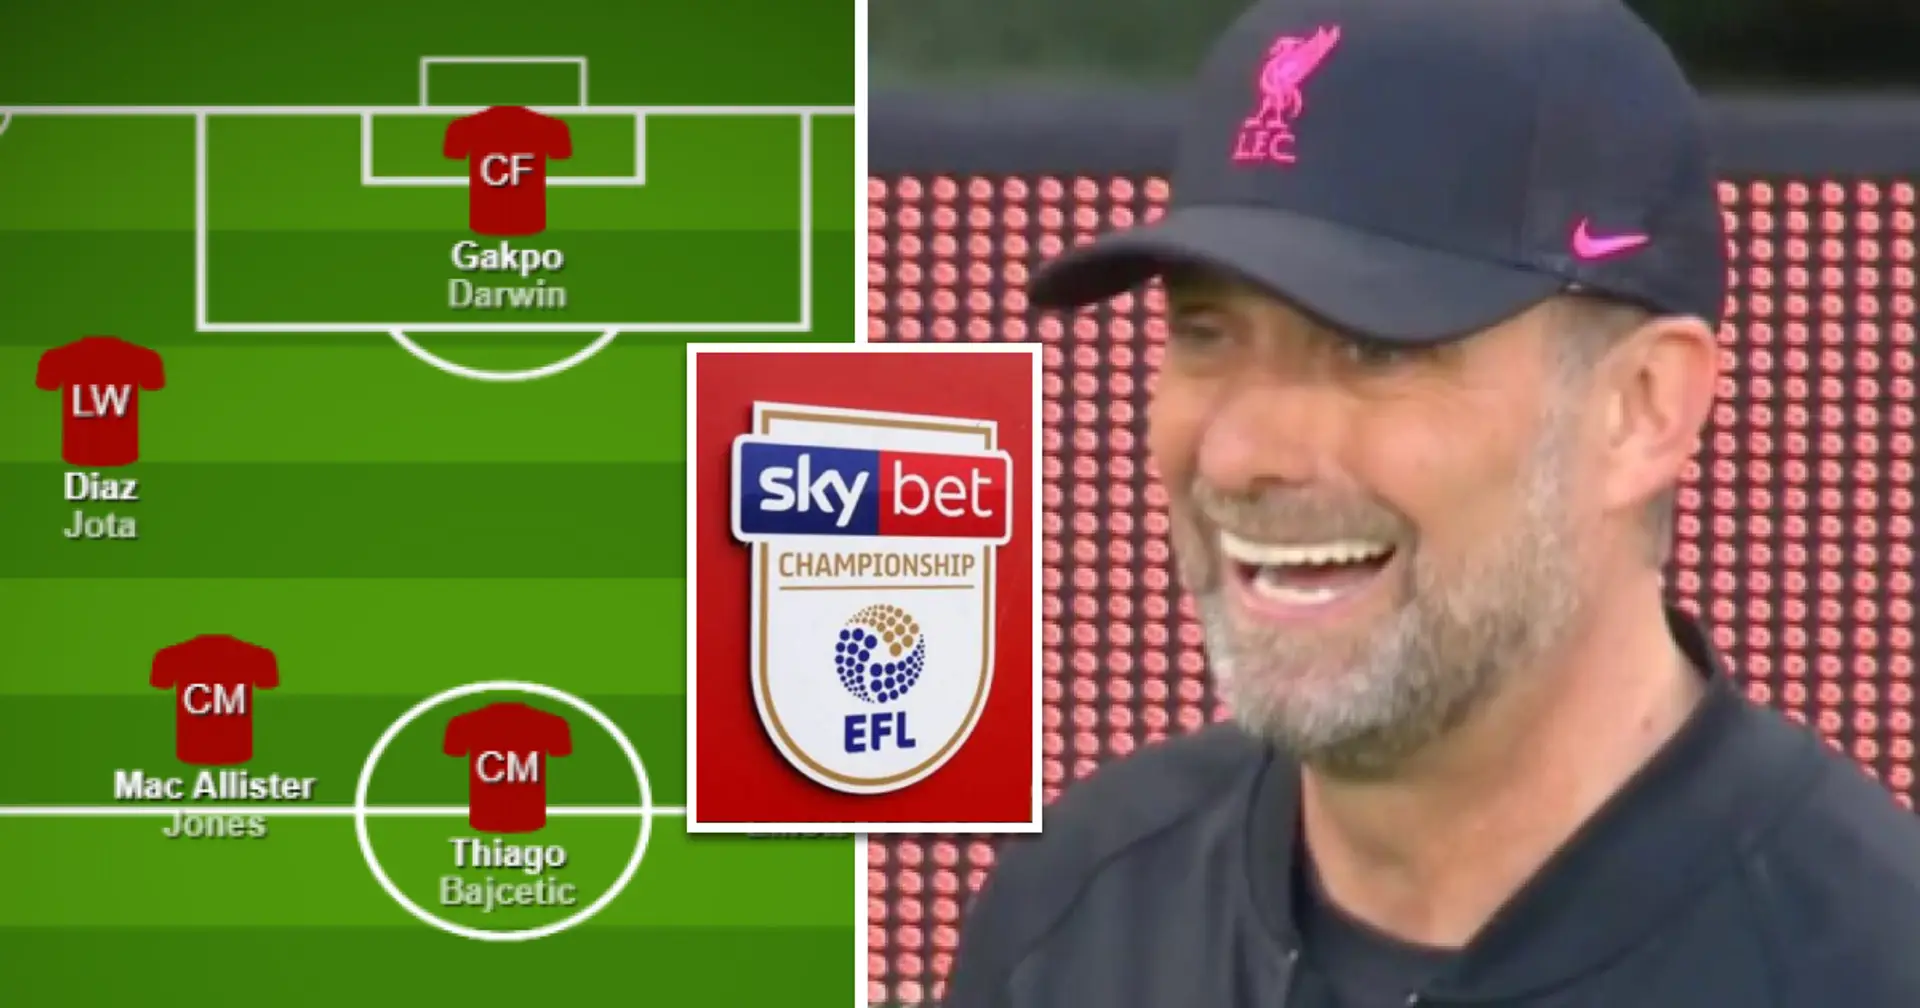 Liverpool's depth if no more new players come shown in line-up